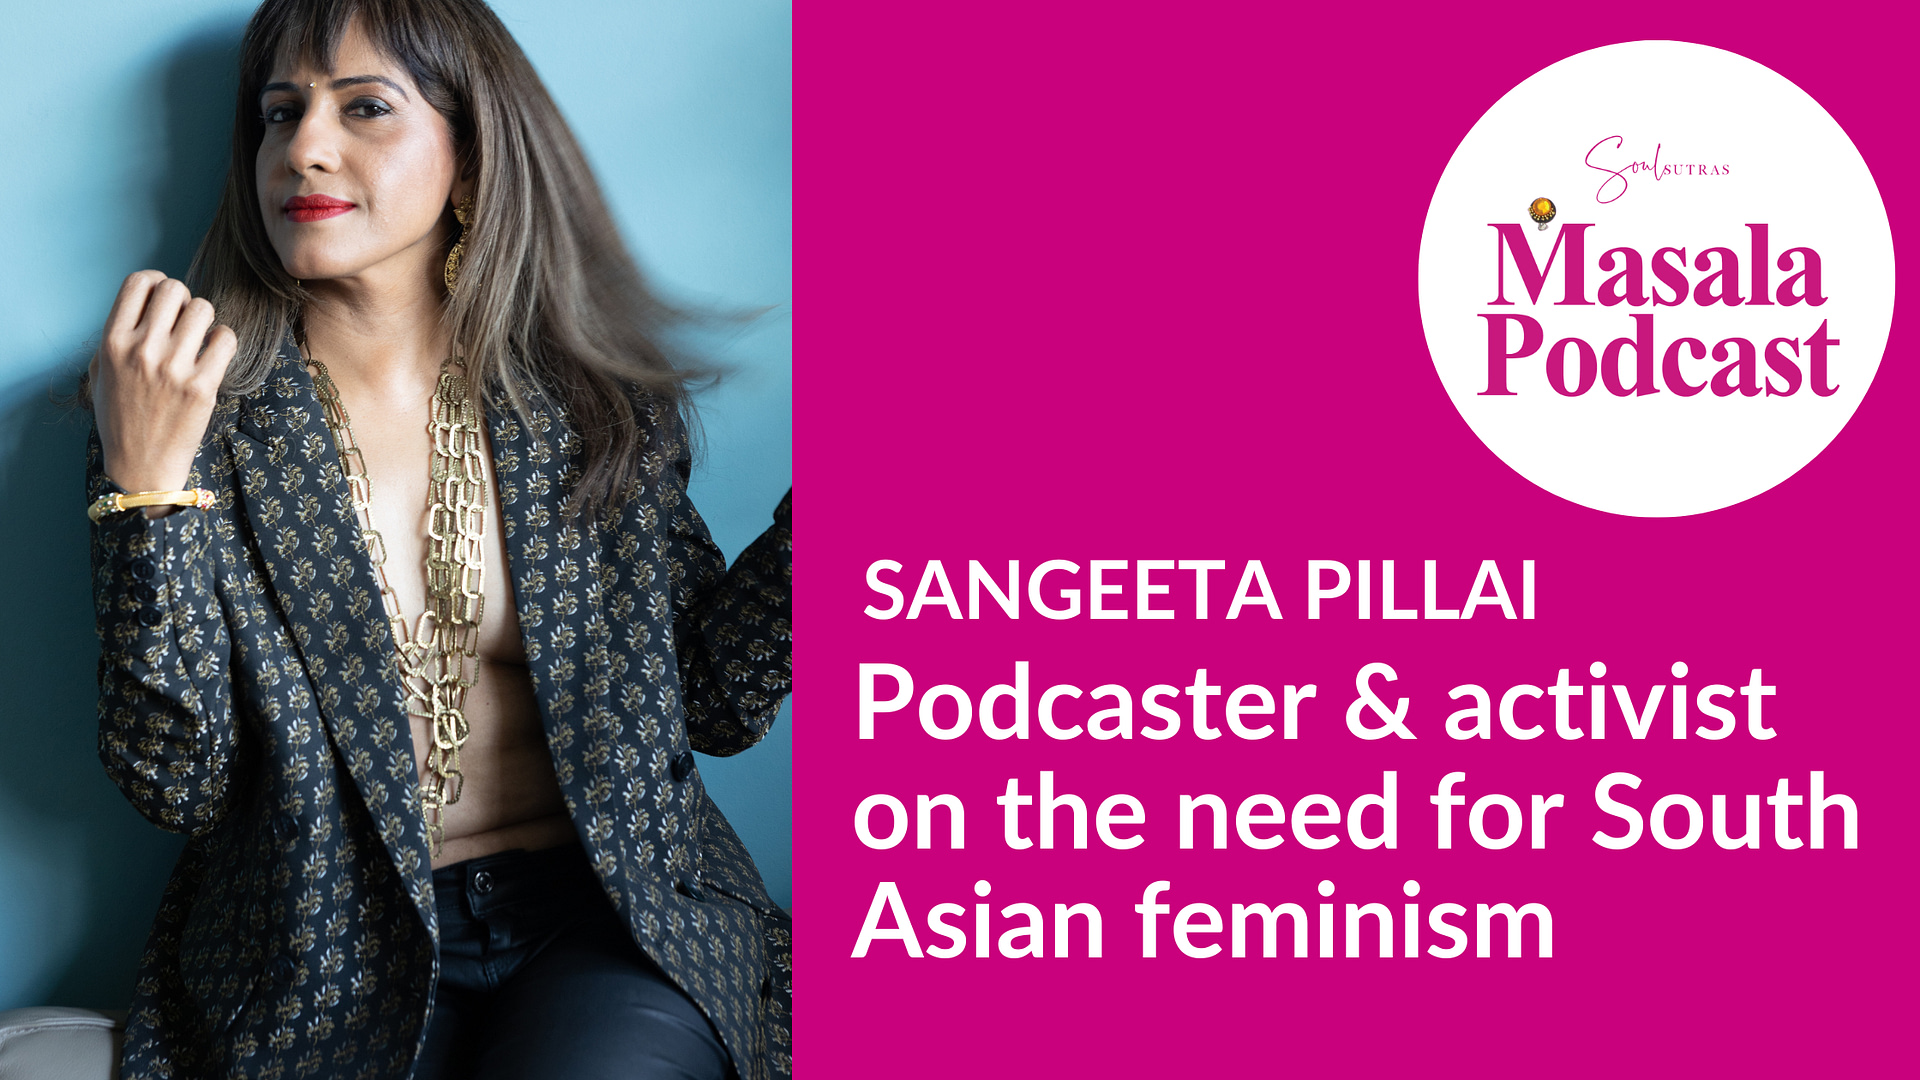 Sangeeta Pillai on the need for South Asian feminism & a South Asian feminist podcast